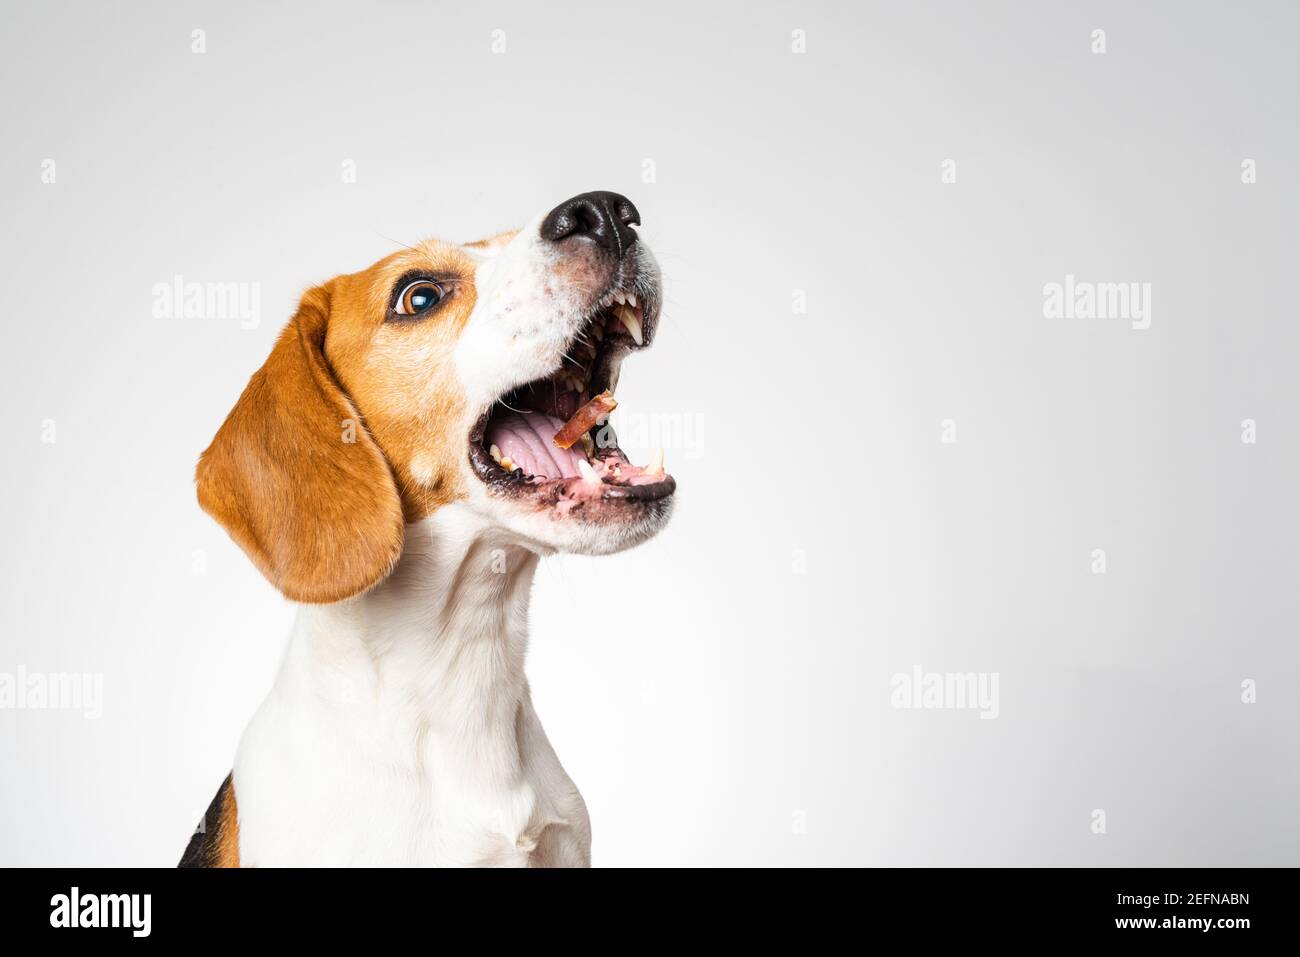 Dog headshoot isolated against white background. Beagle dog catching a treat in midair Stock Photo